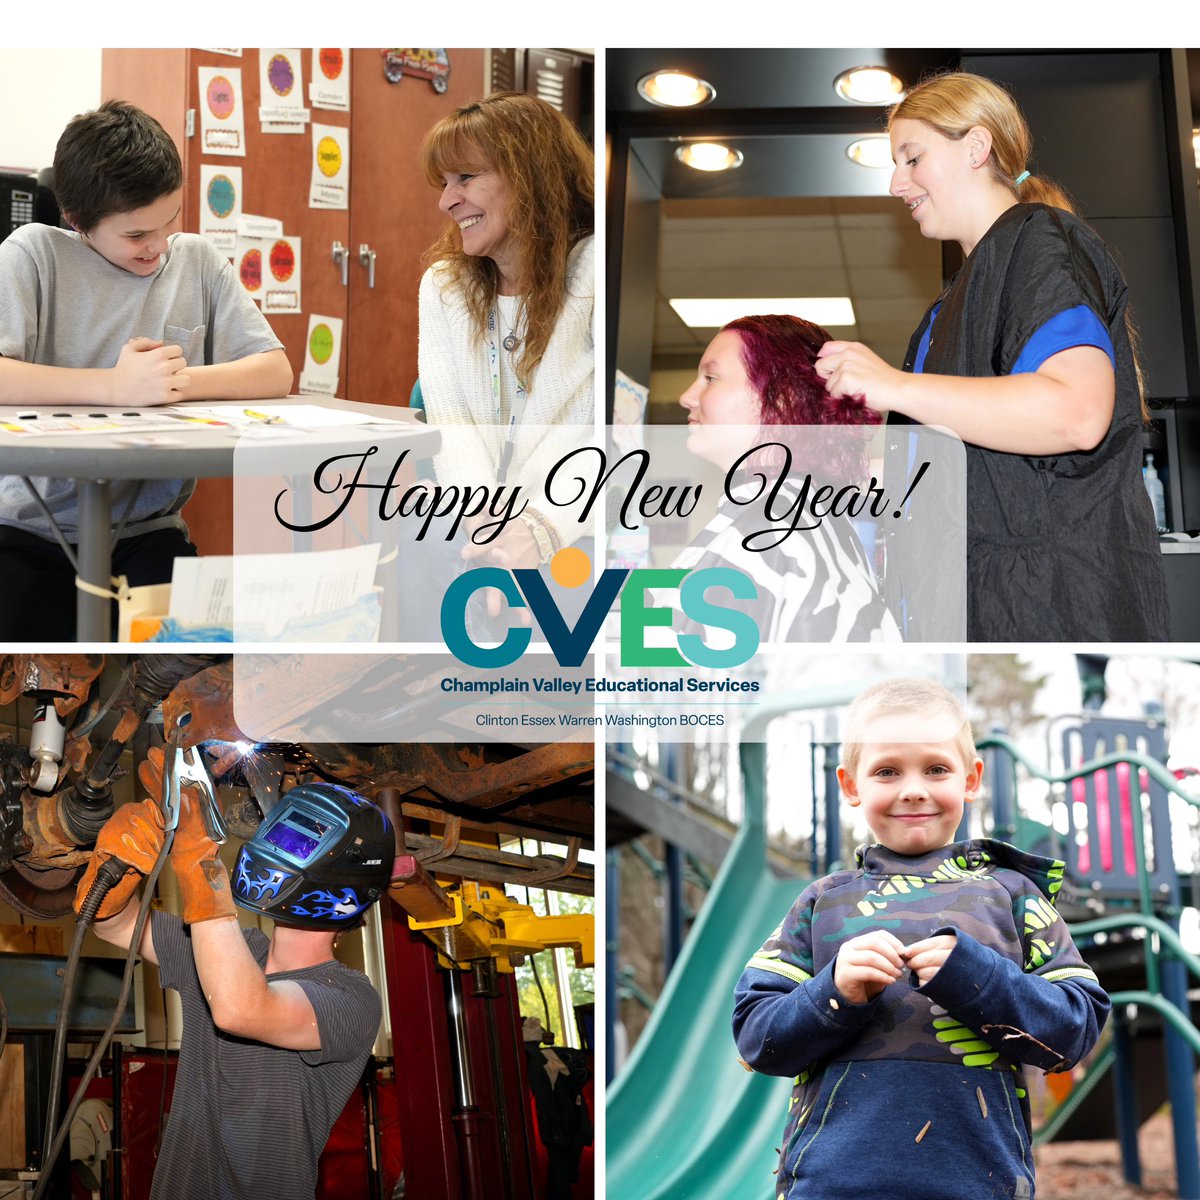 Happy New Year from Champlain Valley Educational Services! As the new year begins and we reflect on 2023, we look forward to continued success with our students, staff and component school districts!